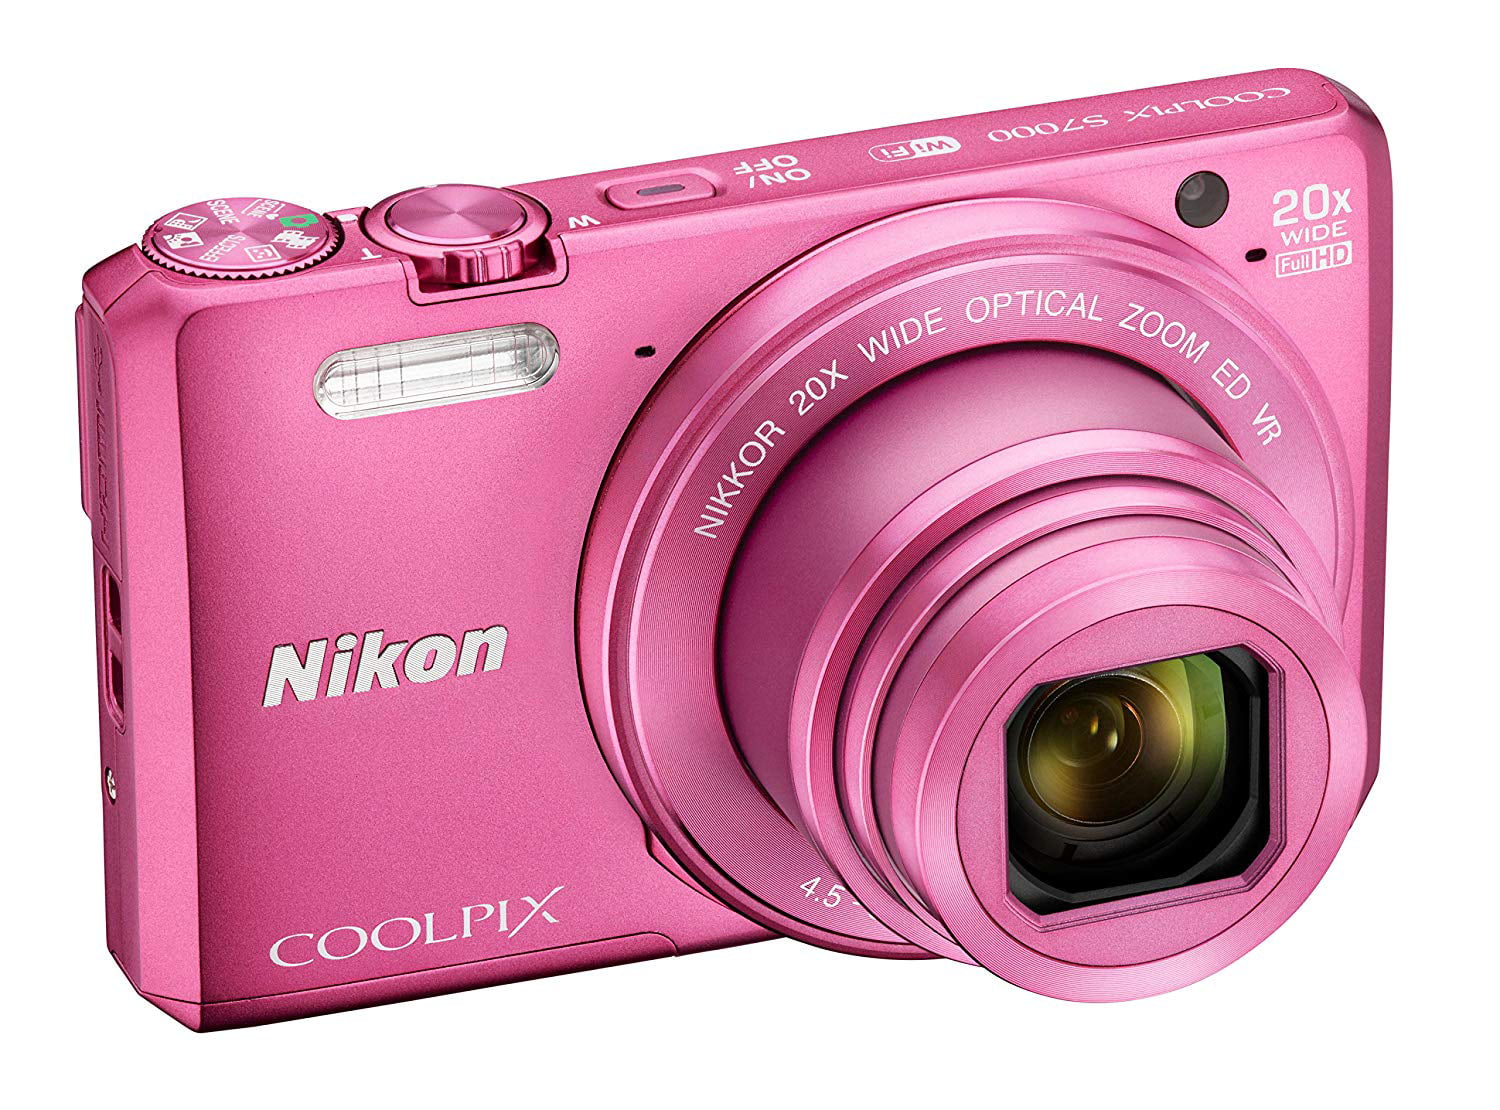 Nikon COOLPIX S7000 Digital Camera (Pink) with 20x Optical Zoom and  Built-In Wi-Fi